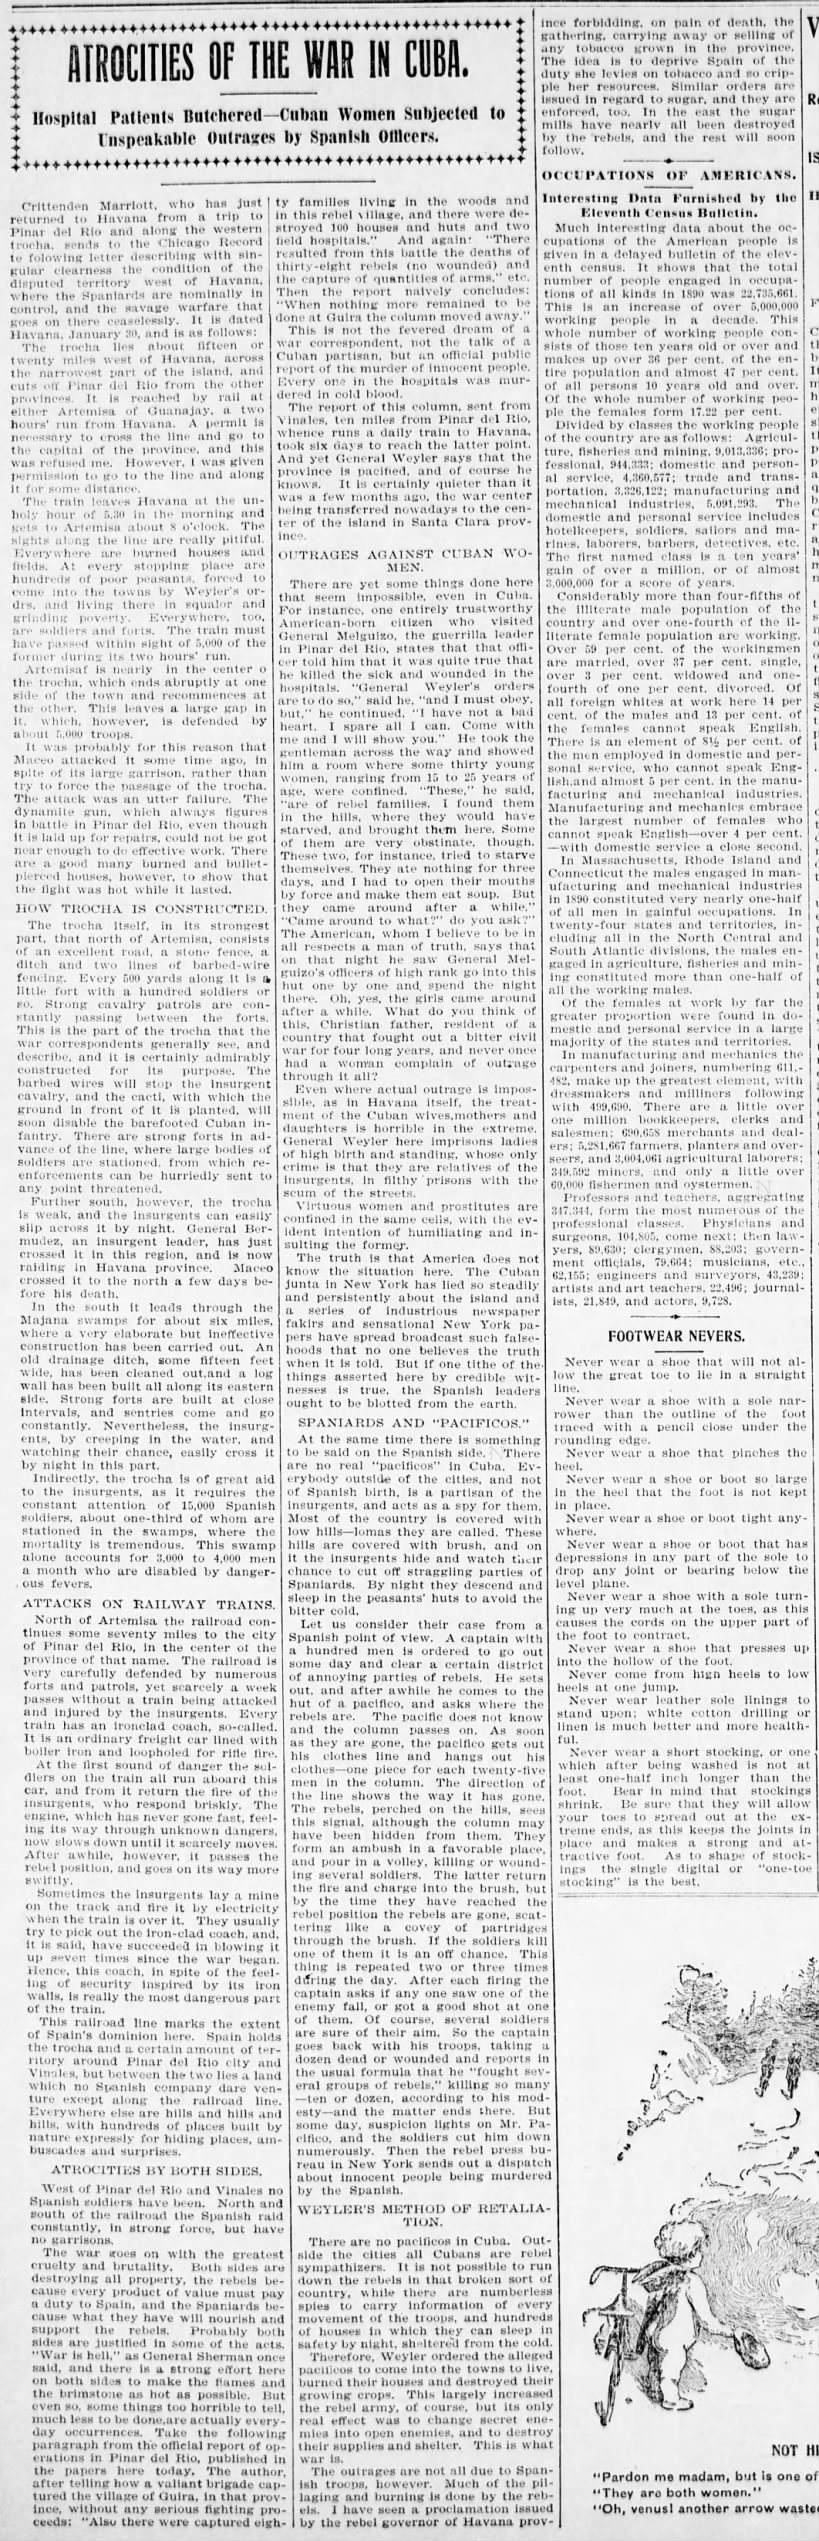 Newspaper account of alleged atrocities committed during Cuba's fight for independence from Spain